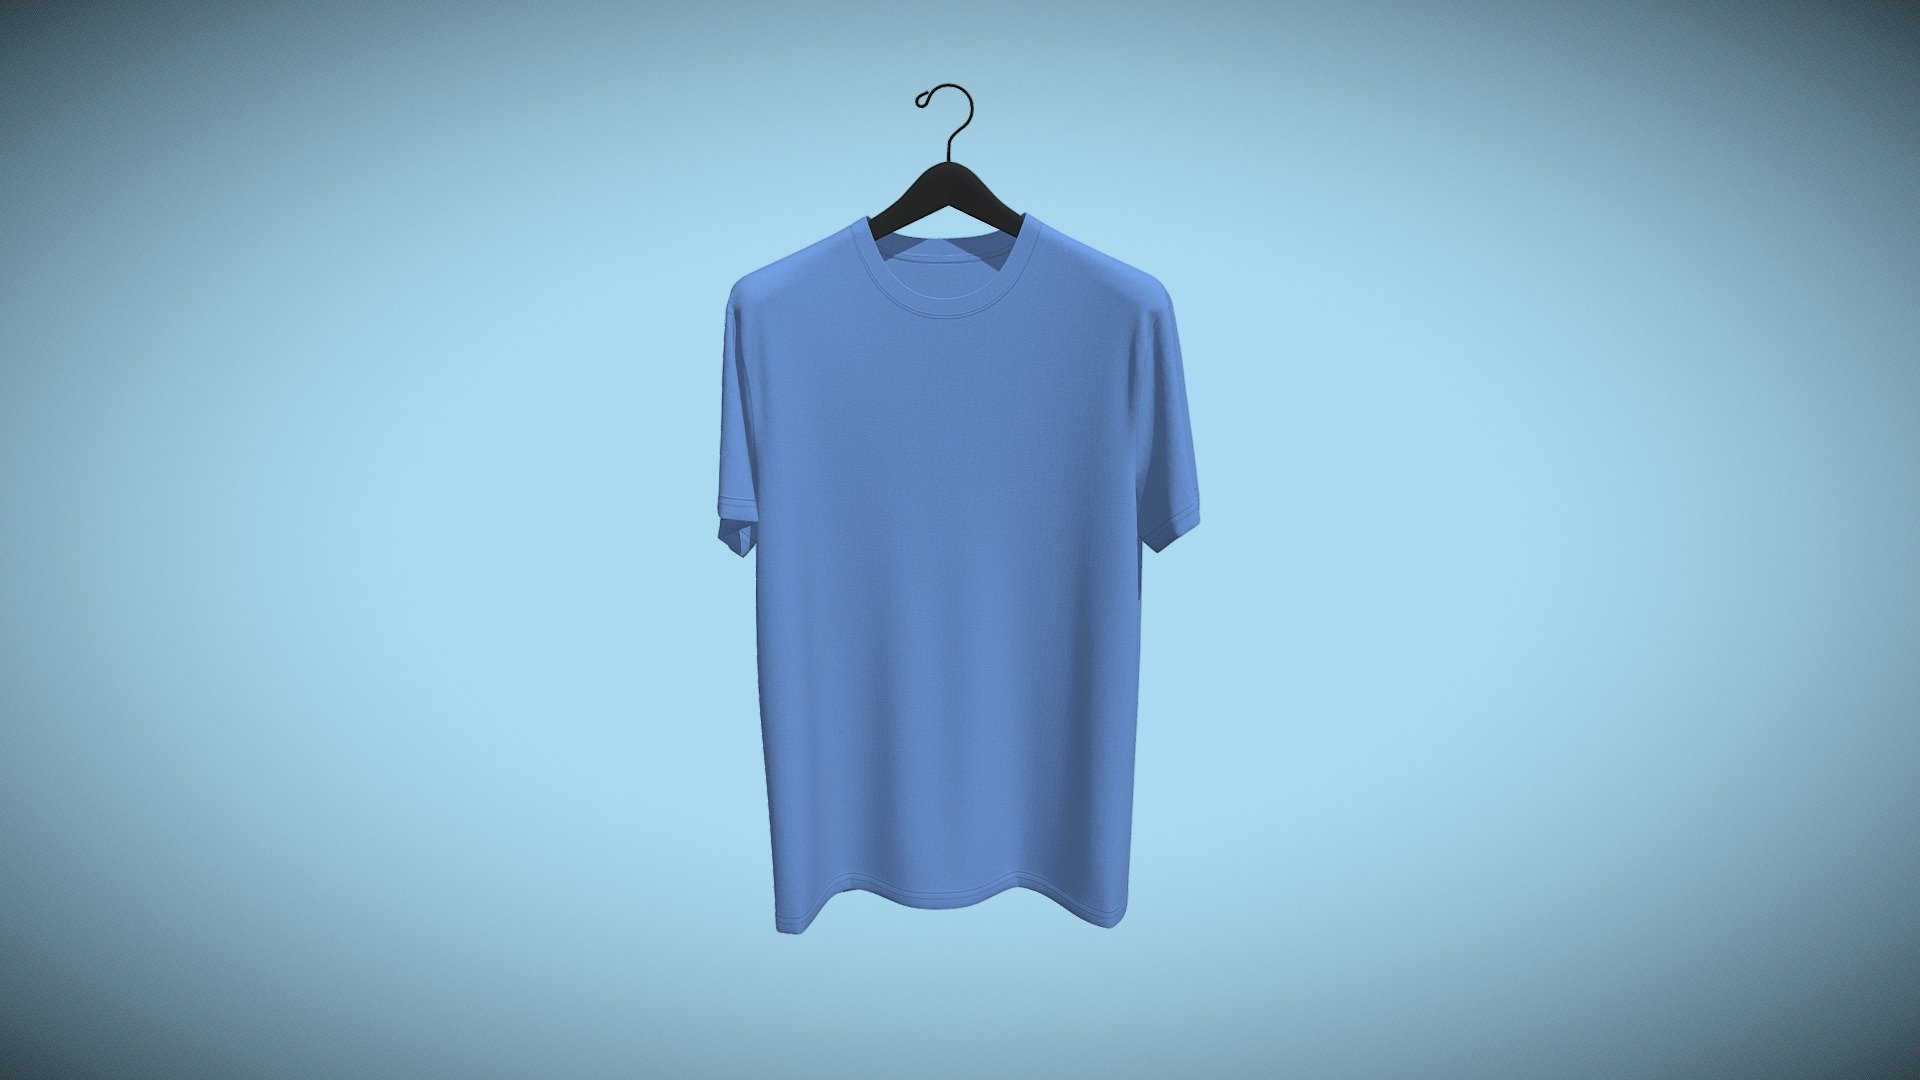 Cloth Title = Hanging Tee Design Blue 

SKU = DG100022 

Category = Unisex 

Product Type = Tee 

Cloth Length = Regular 

Body Fit = Relaxed Fit 

Occasion = Casual  

Sleeve Style = Set In Sleeve 


Our Services:

3D Apparel Design.

OBJ,FBX,GLTF Making with High/Low Poly.

Fabric Digitalization.

Mockup making.

3D Teck Pack.

Pattern Making.

2D Illustration.

Cloth Animation and 360 Spin Video.


Contact us:- 

Email: info@digitalfashionwear.com 

Website: https://digitalfashionwear.com 

WhatsApp No: +8801759350445 


We designed all the types of cloth specially focused on product visualization, e-commerce, fitting, and production. 

We will design: 

T-shirts 

Polo shirts 

Hoodies 

Sweatshirt 

Jackets 

Shirts 

TankTops 

Trousers 

Bras 

Underwear 

Blazer 

Aprons 

Leggings 

and All Fashion items. 




Our goal is to make sure what we provide you, meets your demand 3d model